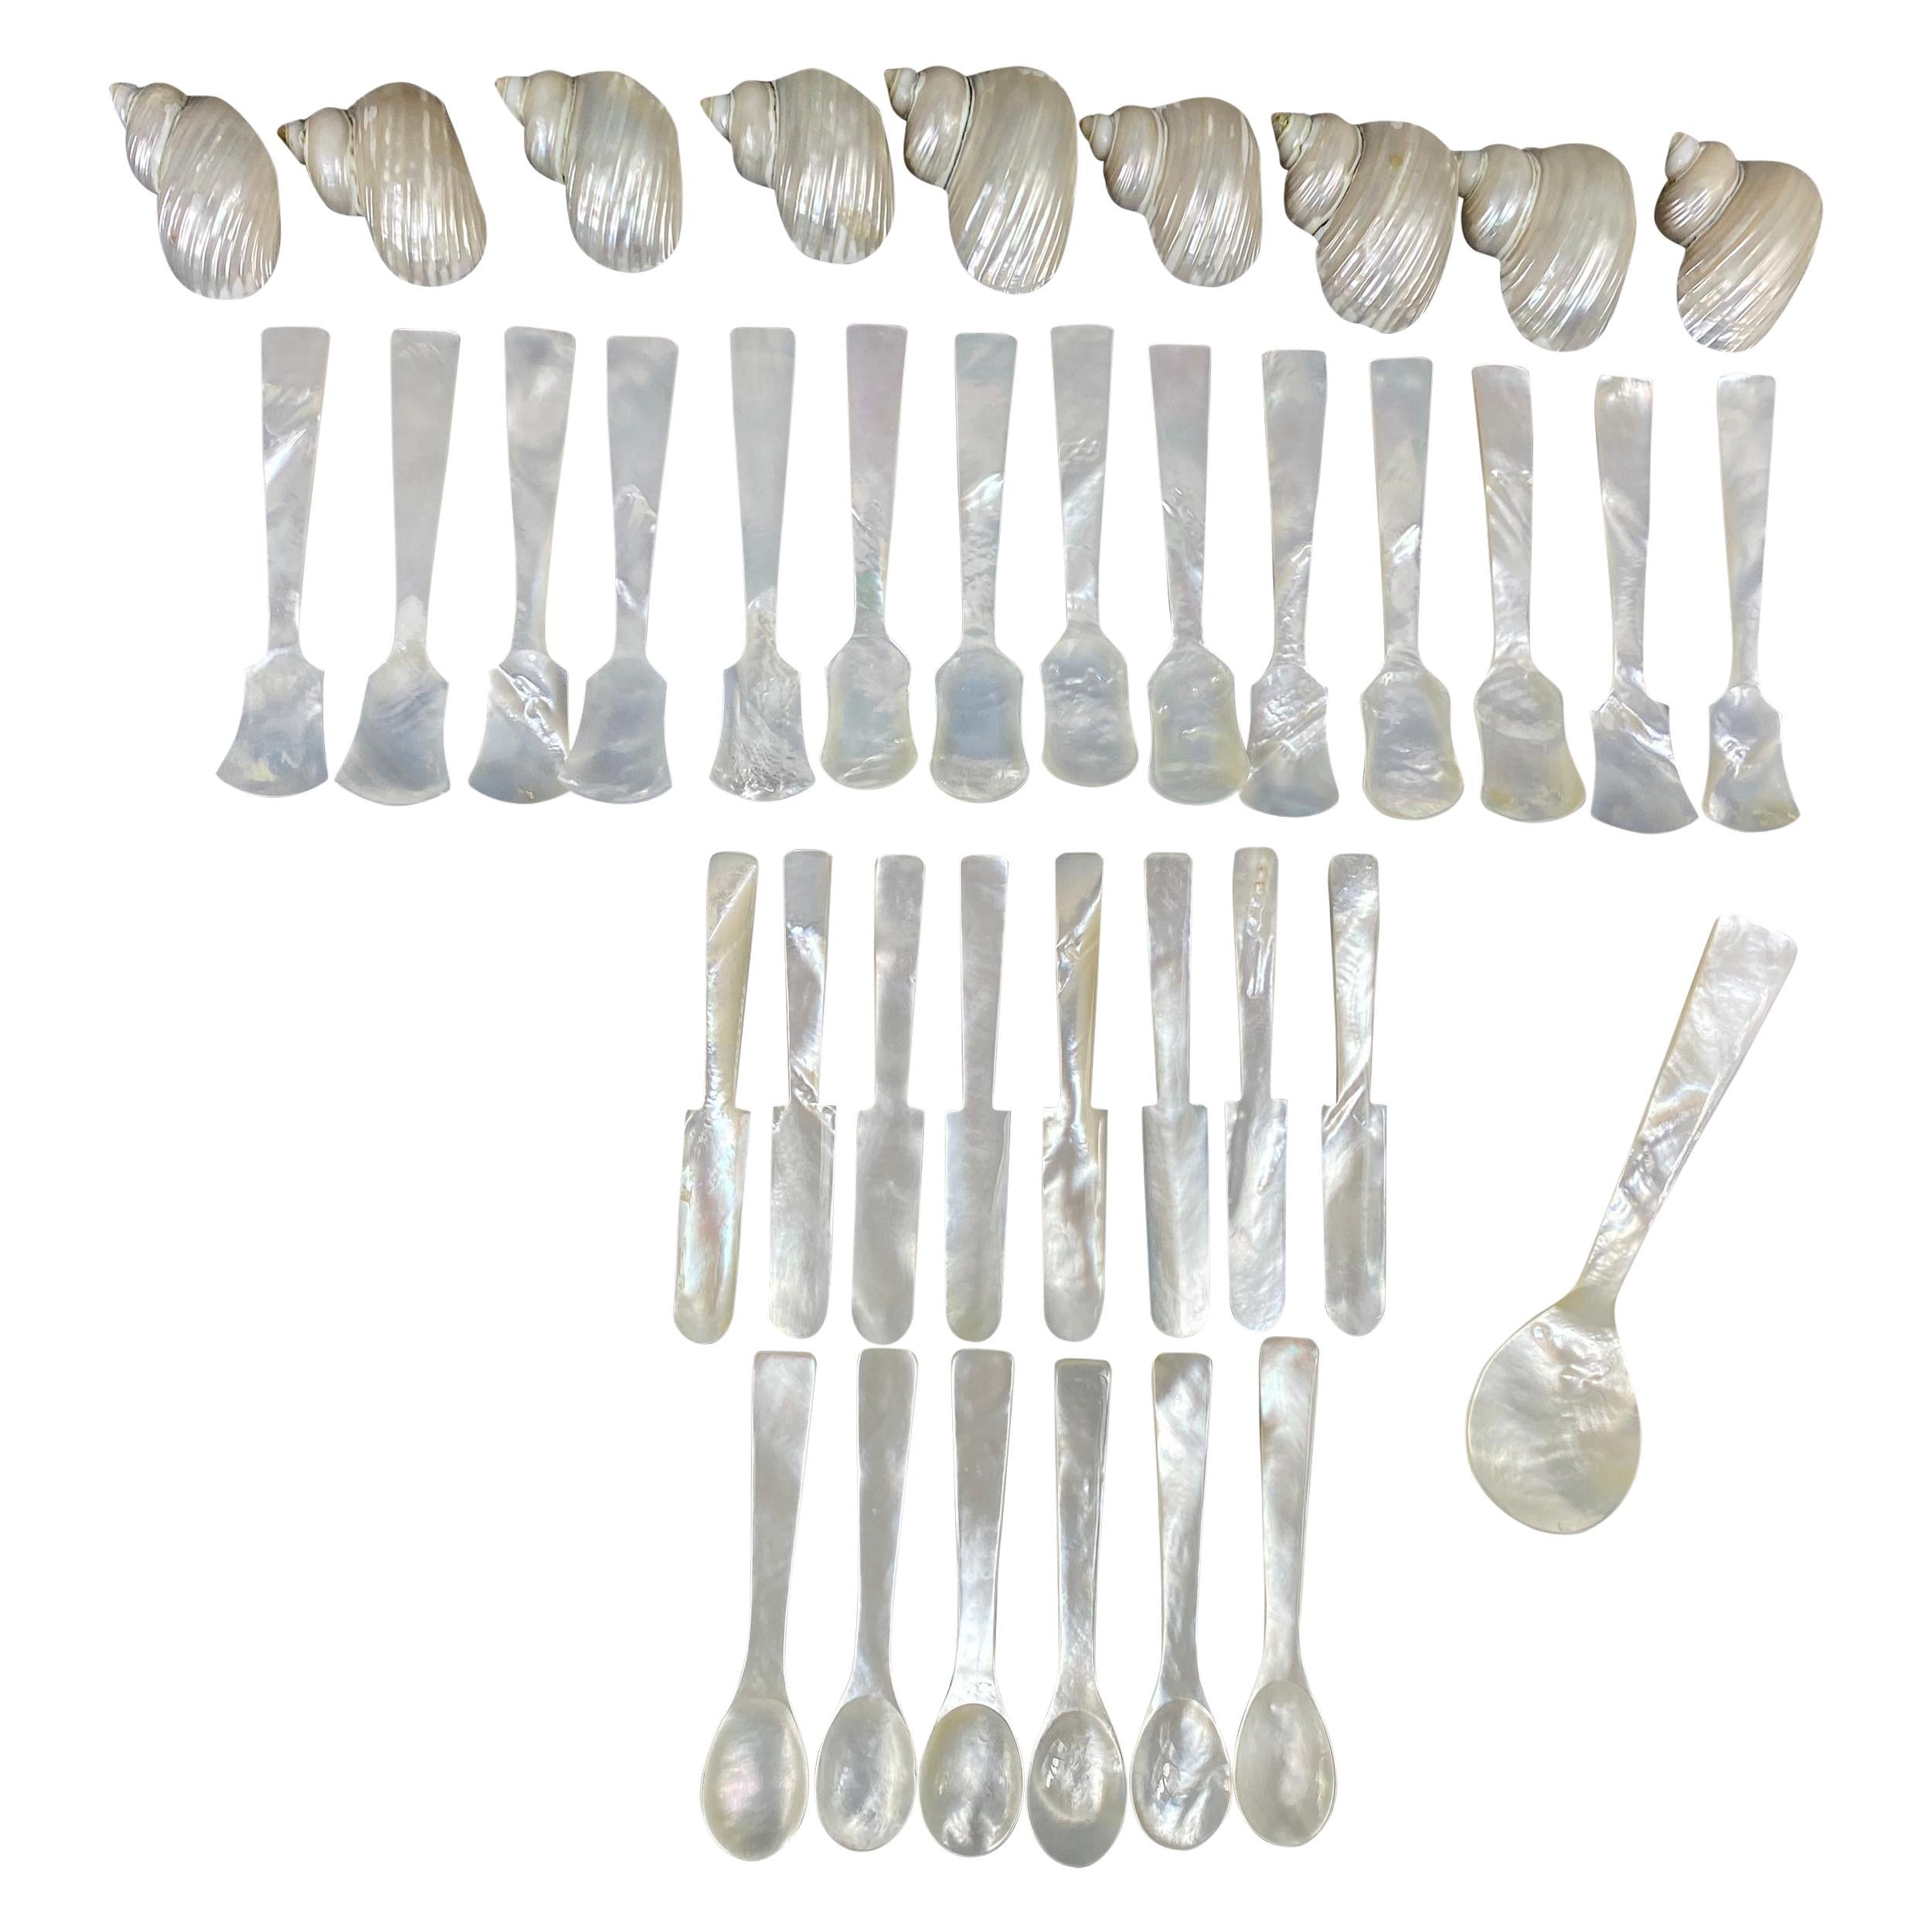 Mother of Pearl Caviar Spoons and Butter Knifes and Serving Cup Holder Shells